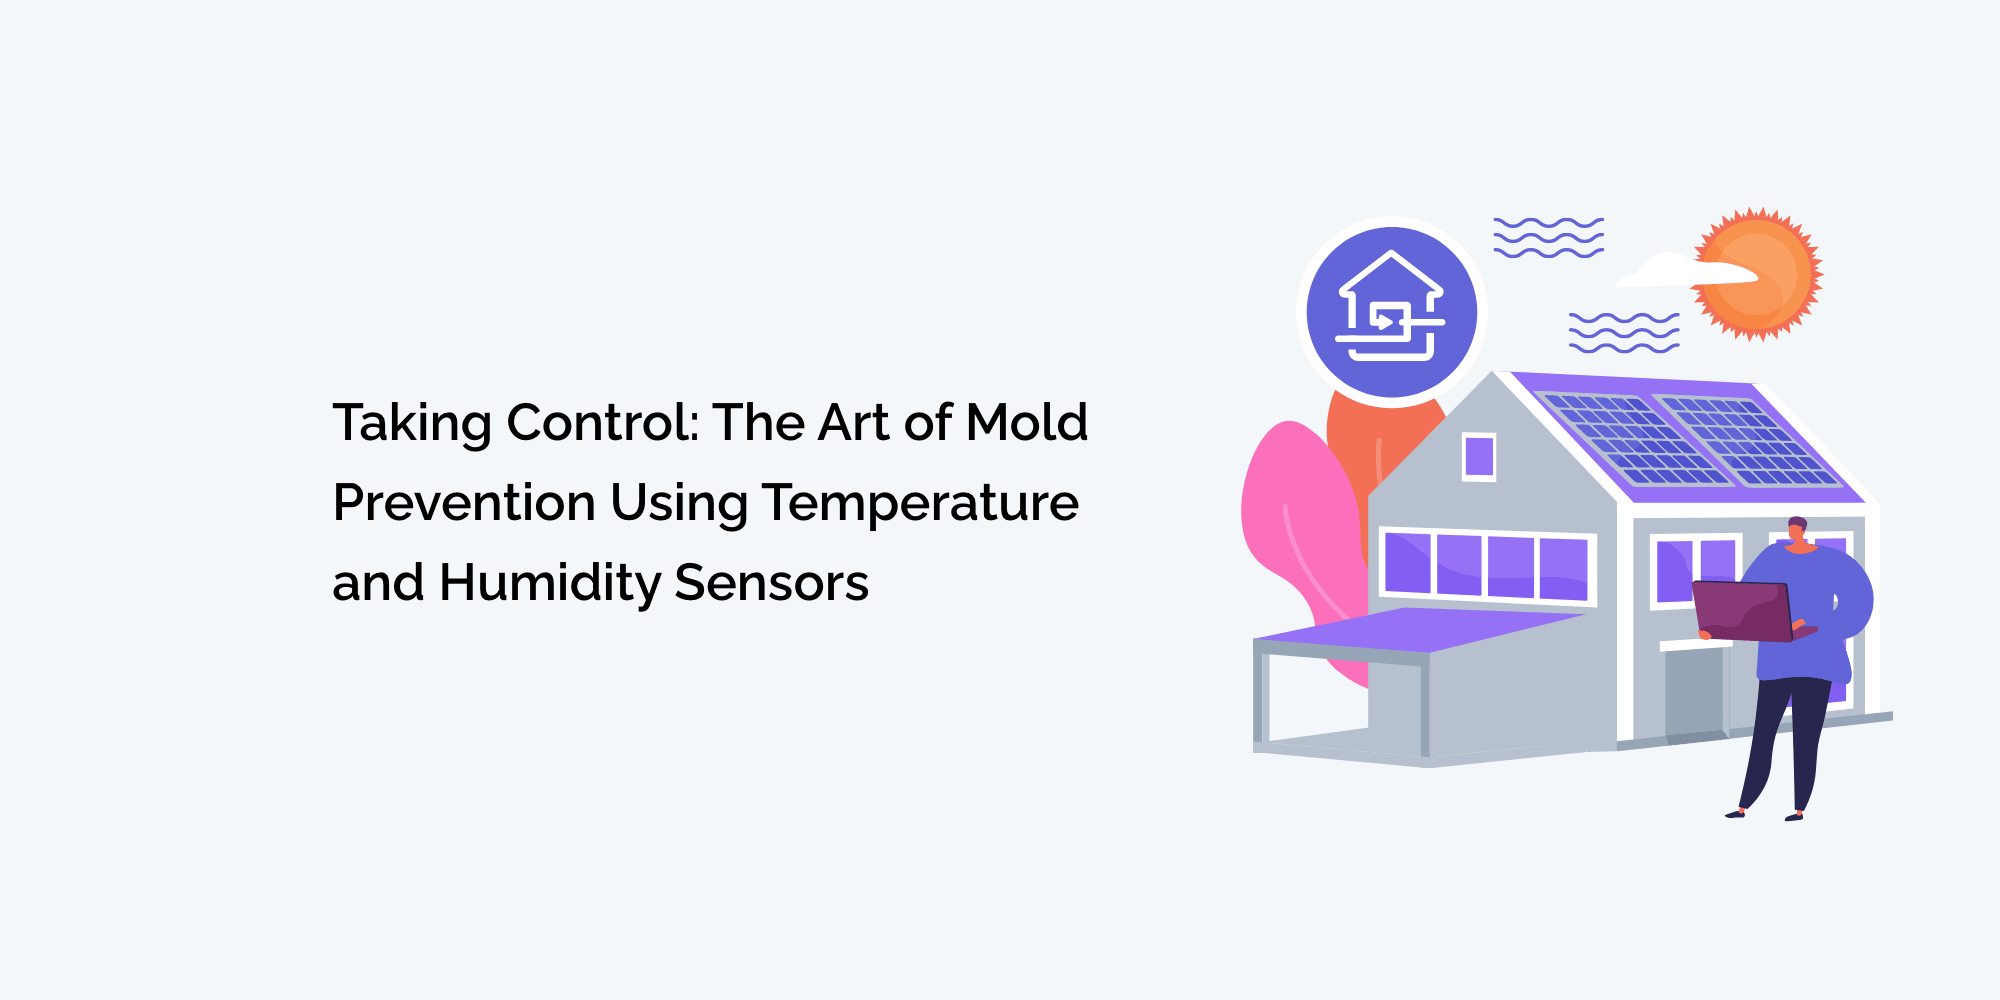 Taking Control: The Art of Mold Prevention Using Temperature and Humidity Sensors